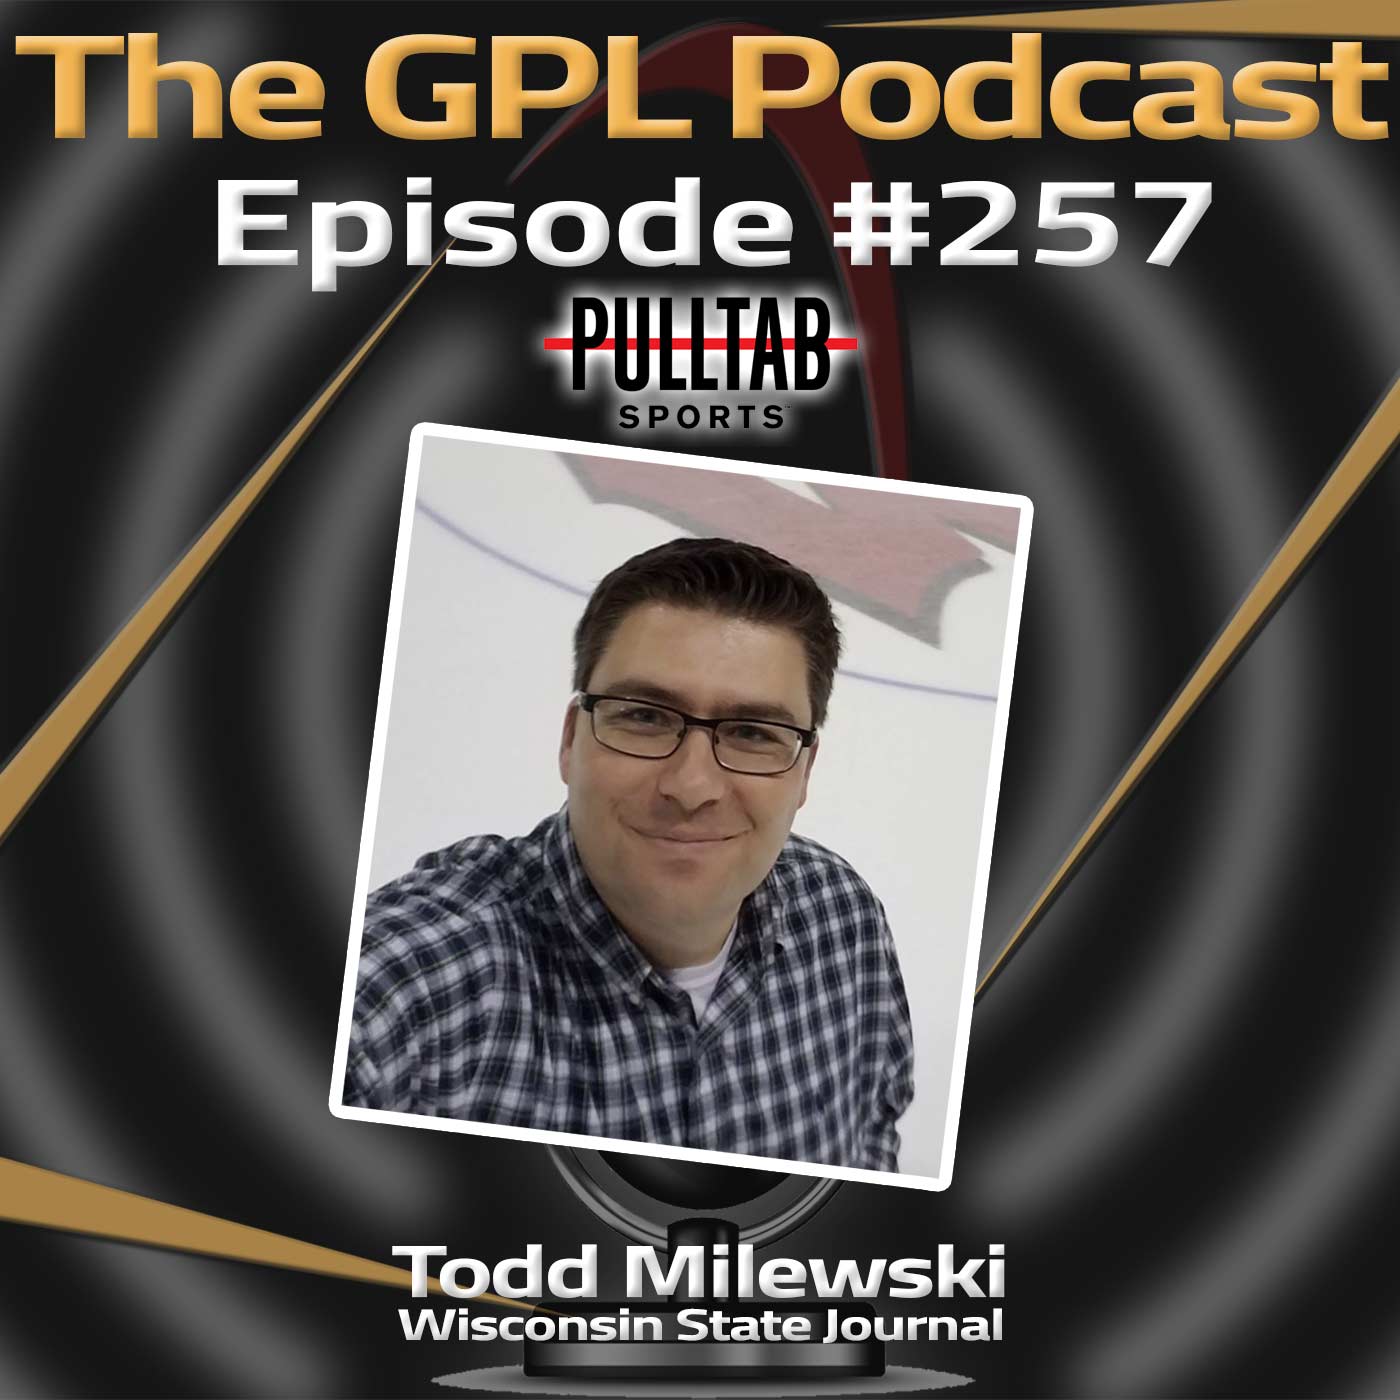 GPL Podcast #257: Todd Milewski is back to talk about a VERY resurgent Badger team.